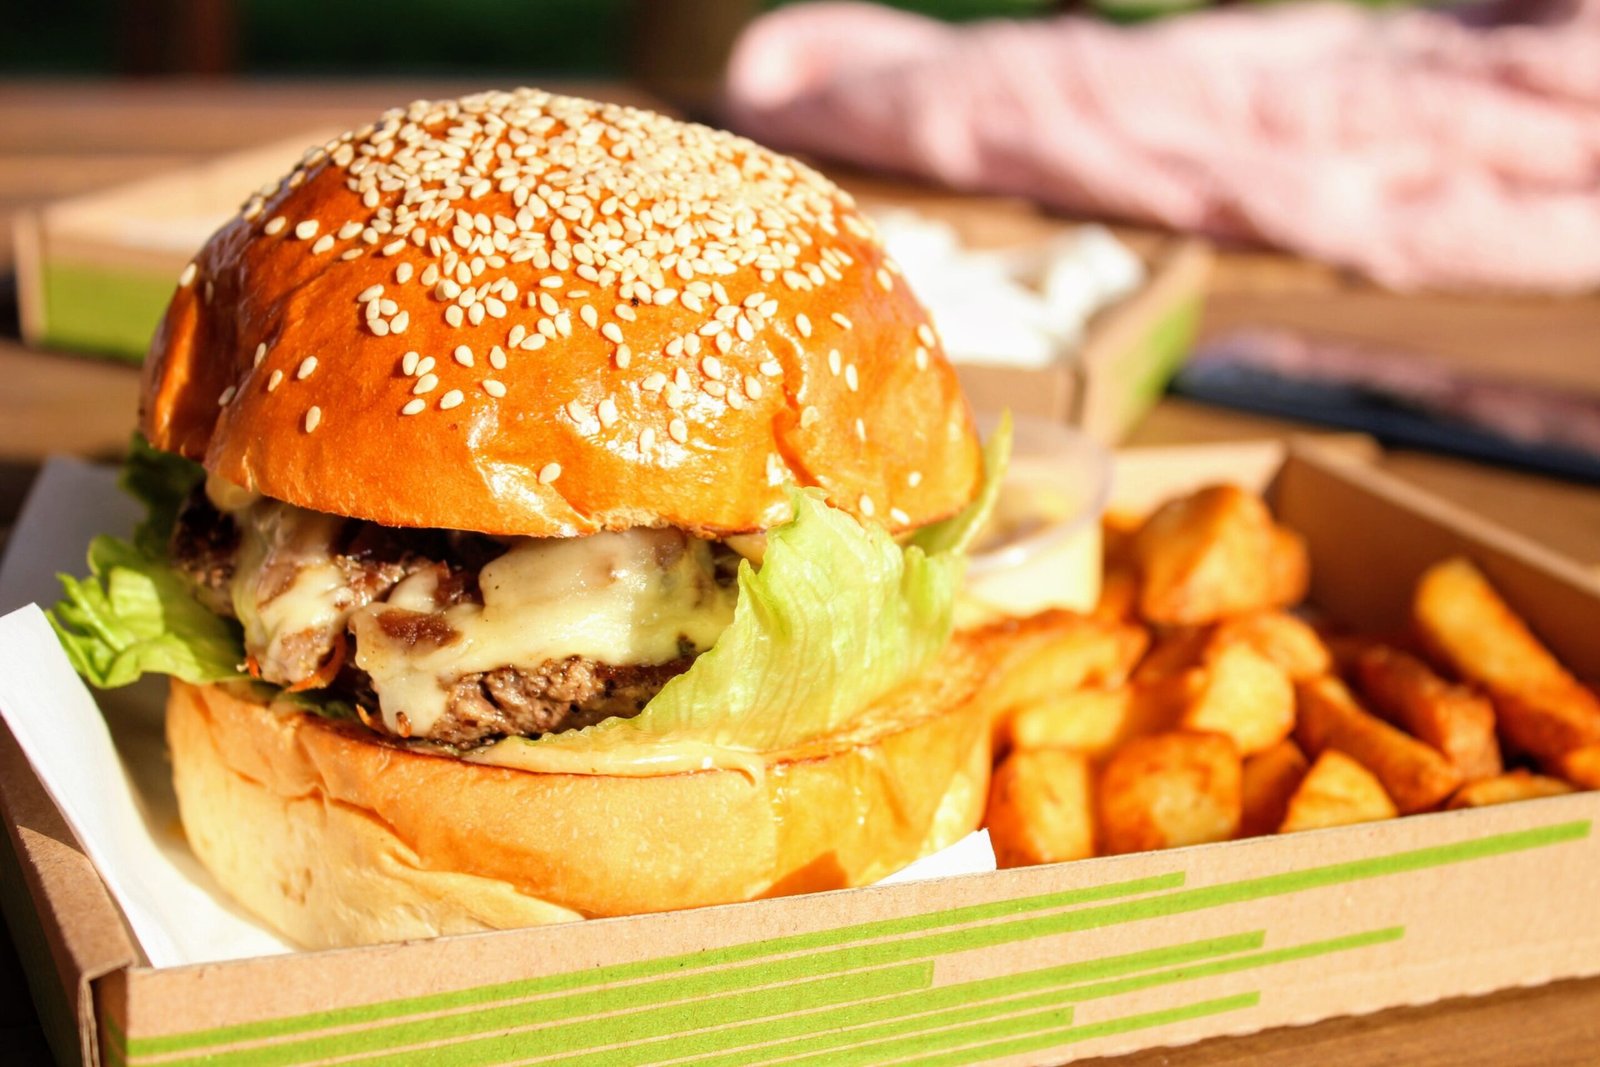 Living near pubs bars and fast food restaurants could be bad for heart health